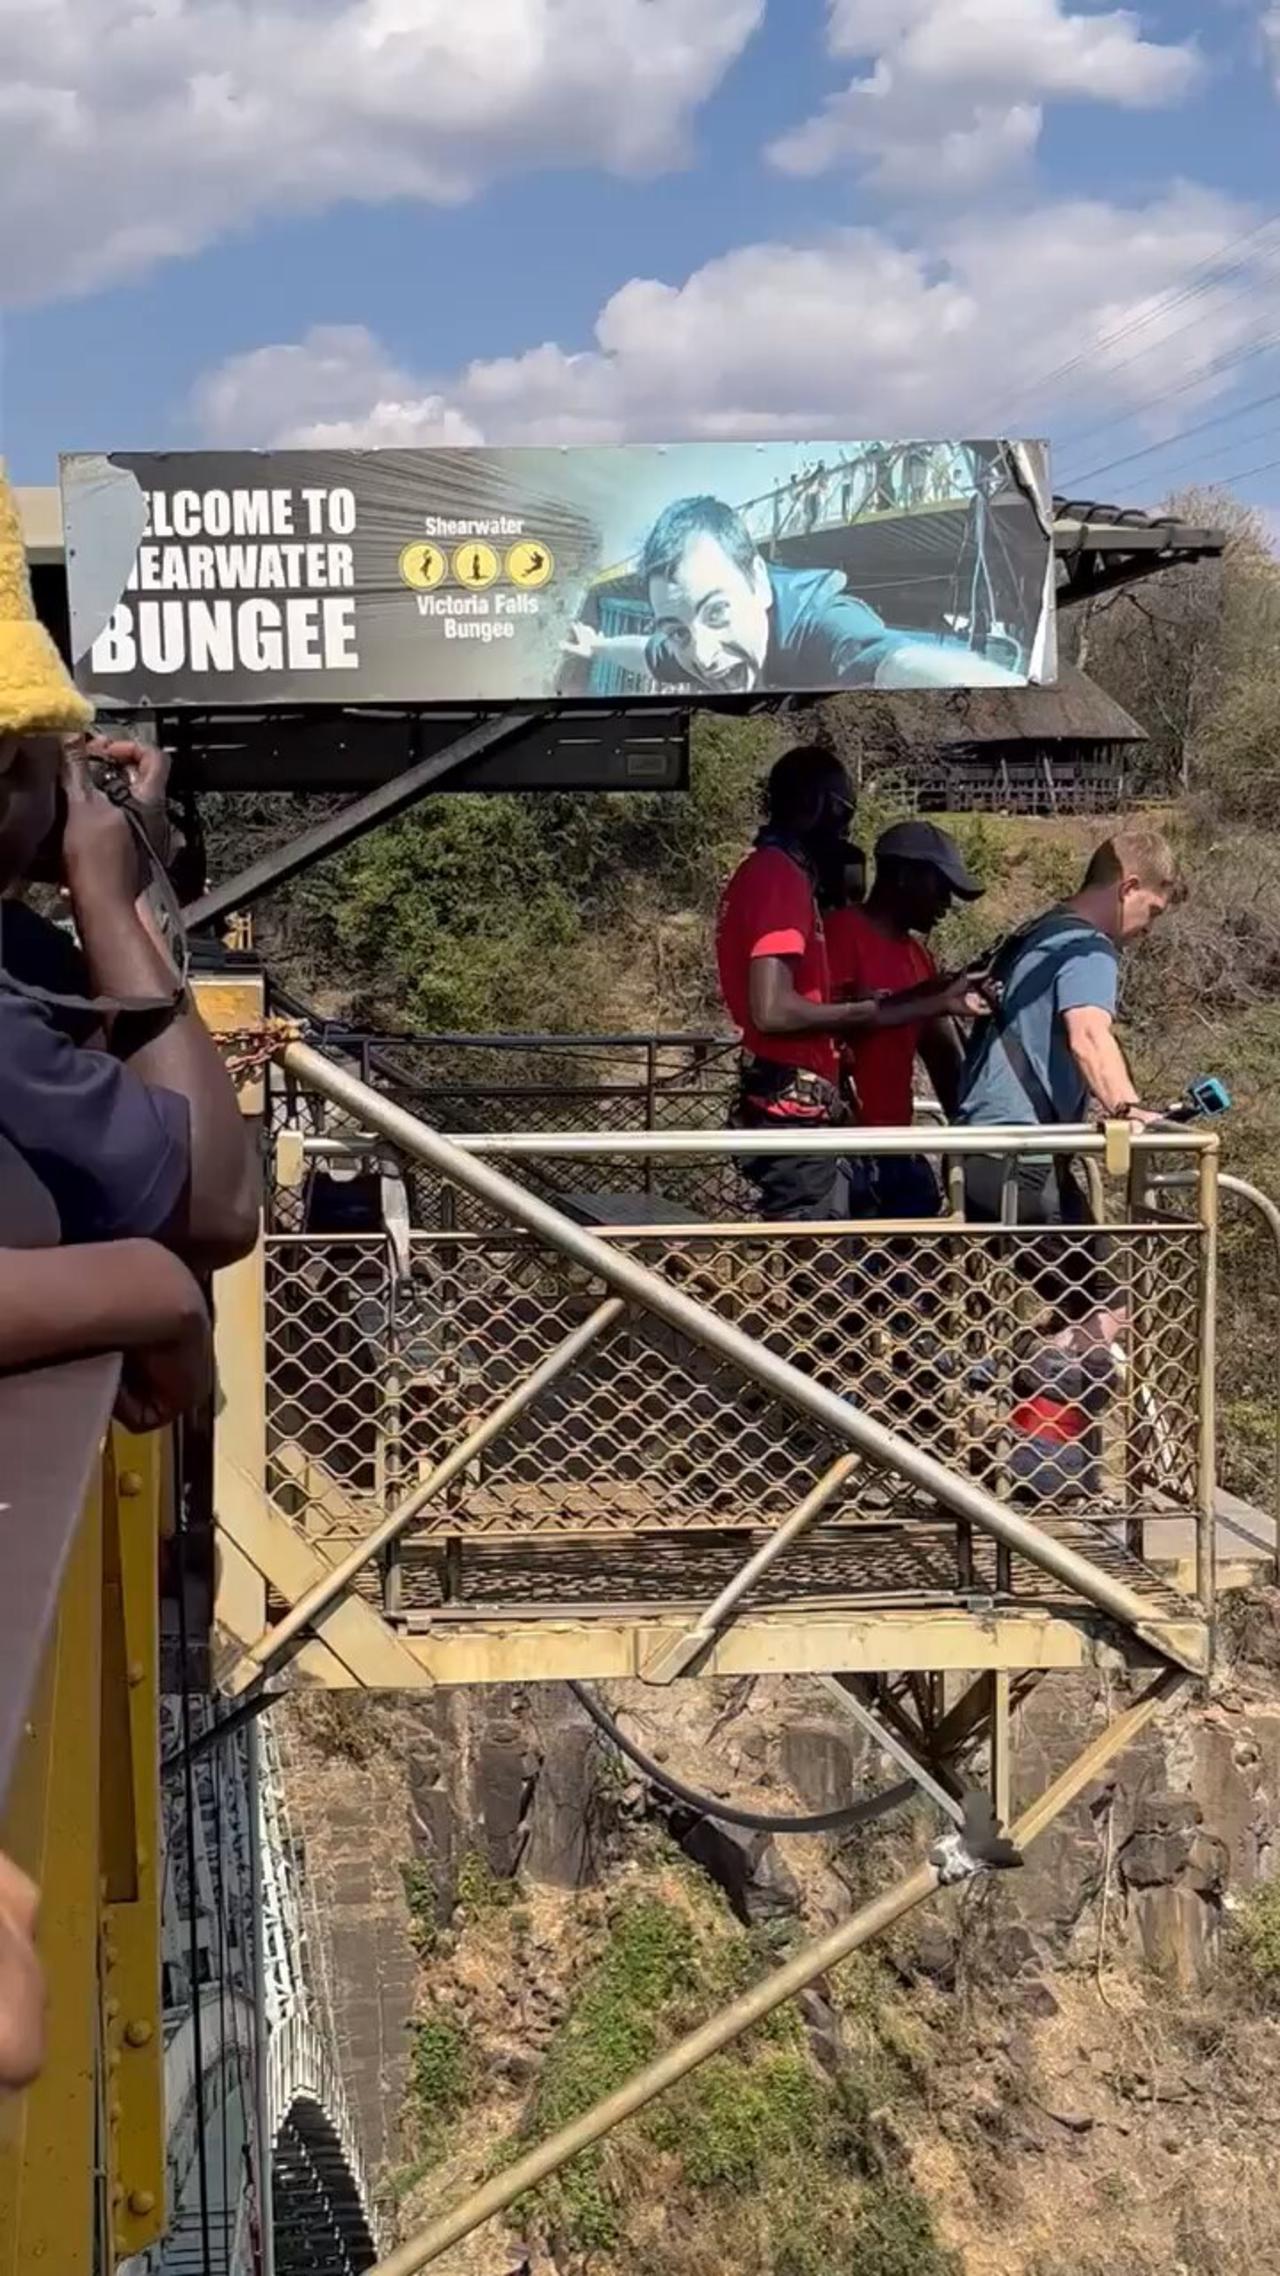 Bungee Jumping 364ft at Victoria Falls